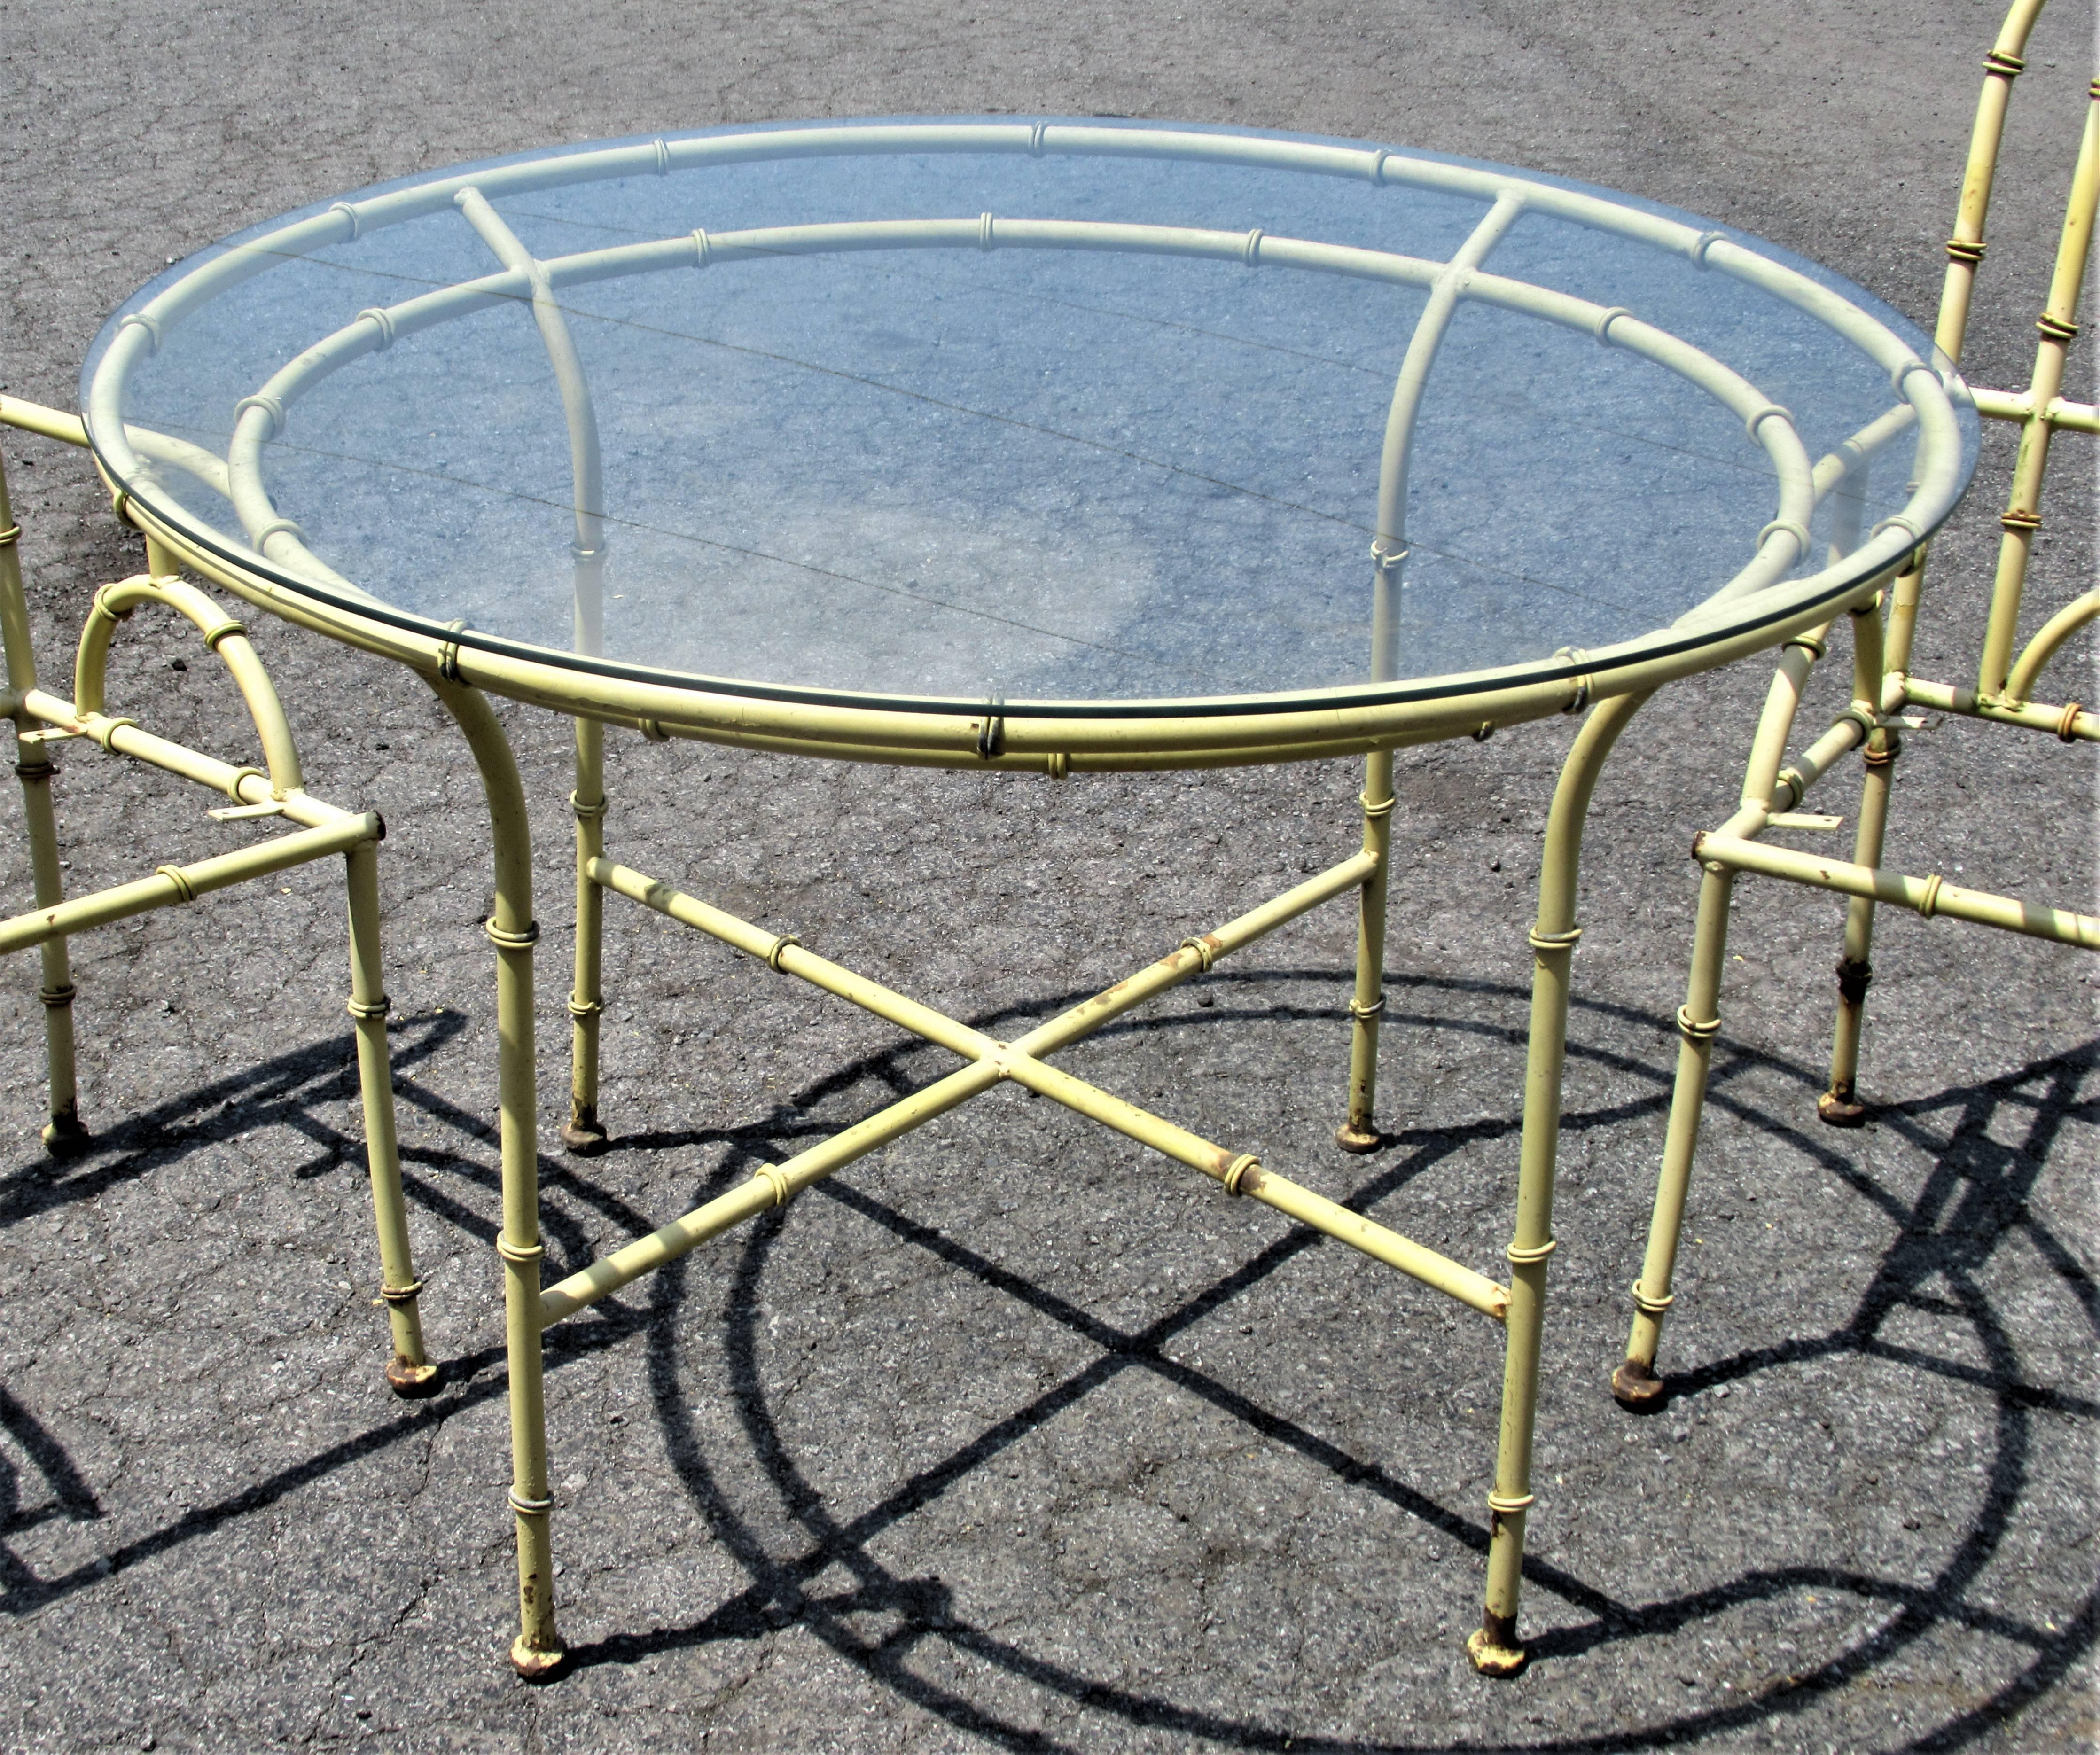 Hollywood Regency Chinese Chippendale style metal faux bamboo round glass top dining table with four matching armchairs in original nicely aged very pale chartreuse yellow factory enamel painted surface. Patio garden furniture or interior use.